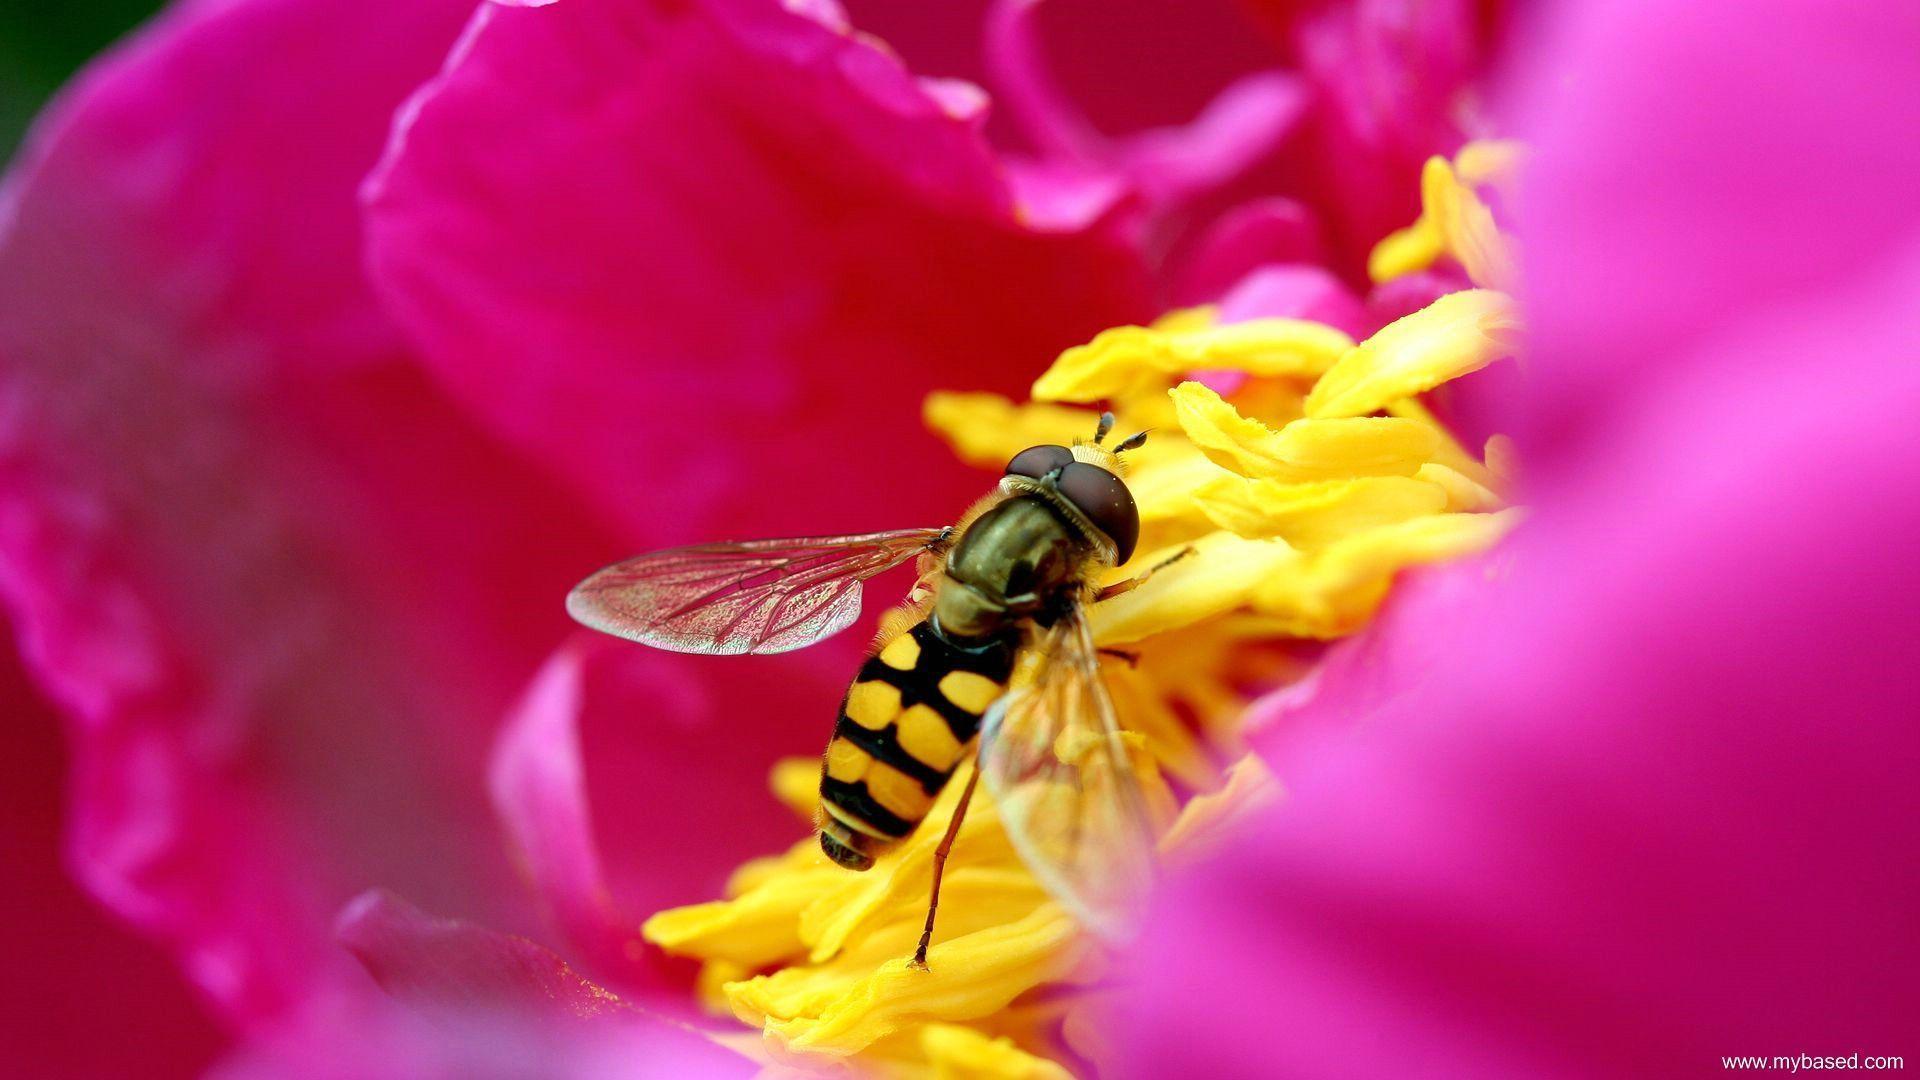 hdtv pink bee insects HD Wallpaper 1920x1080